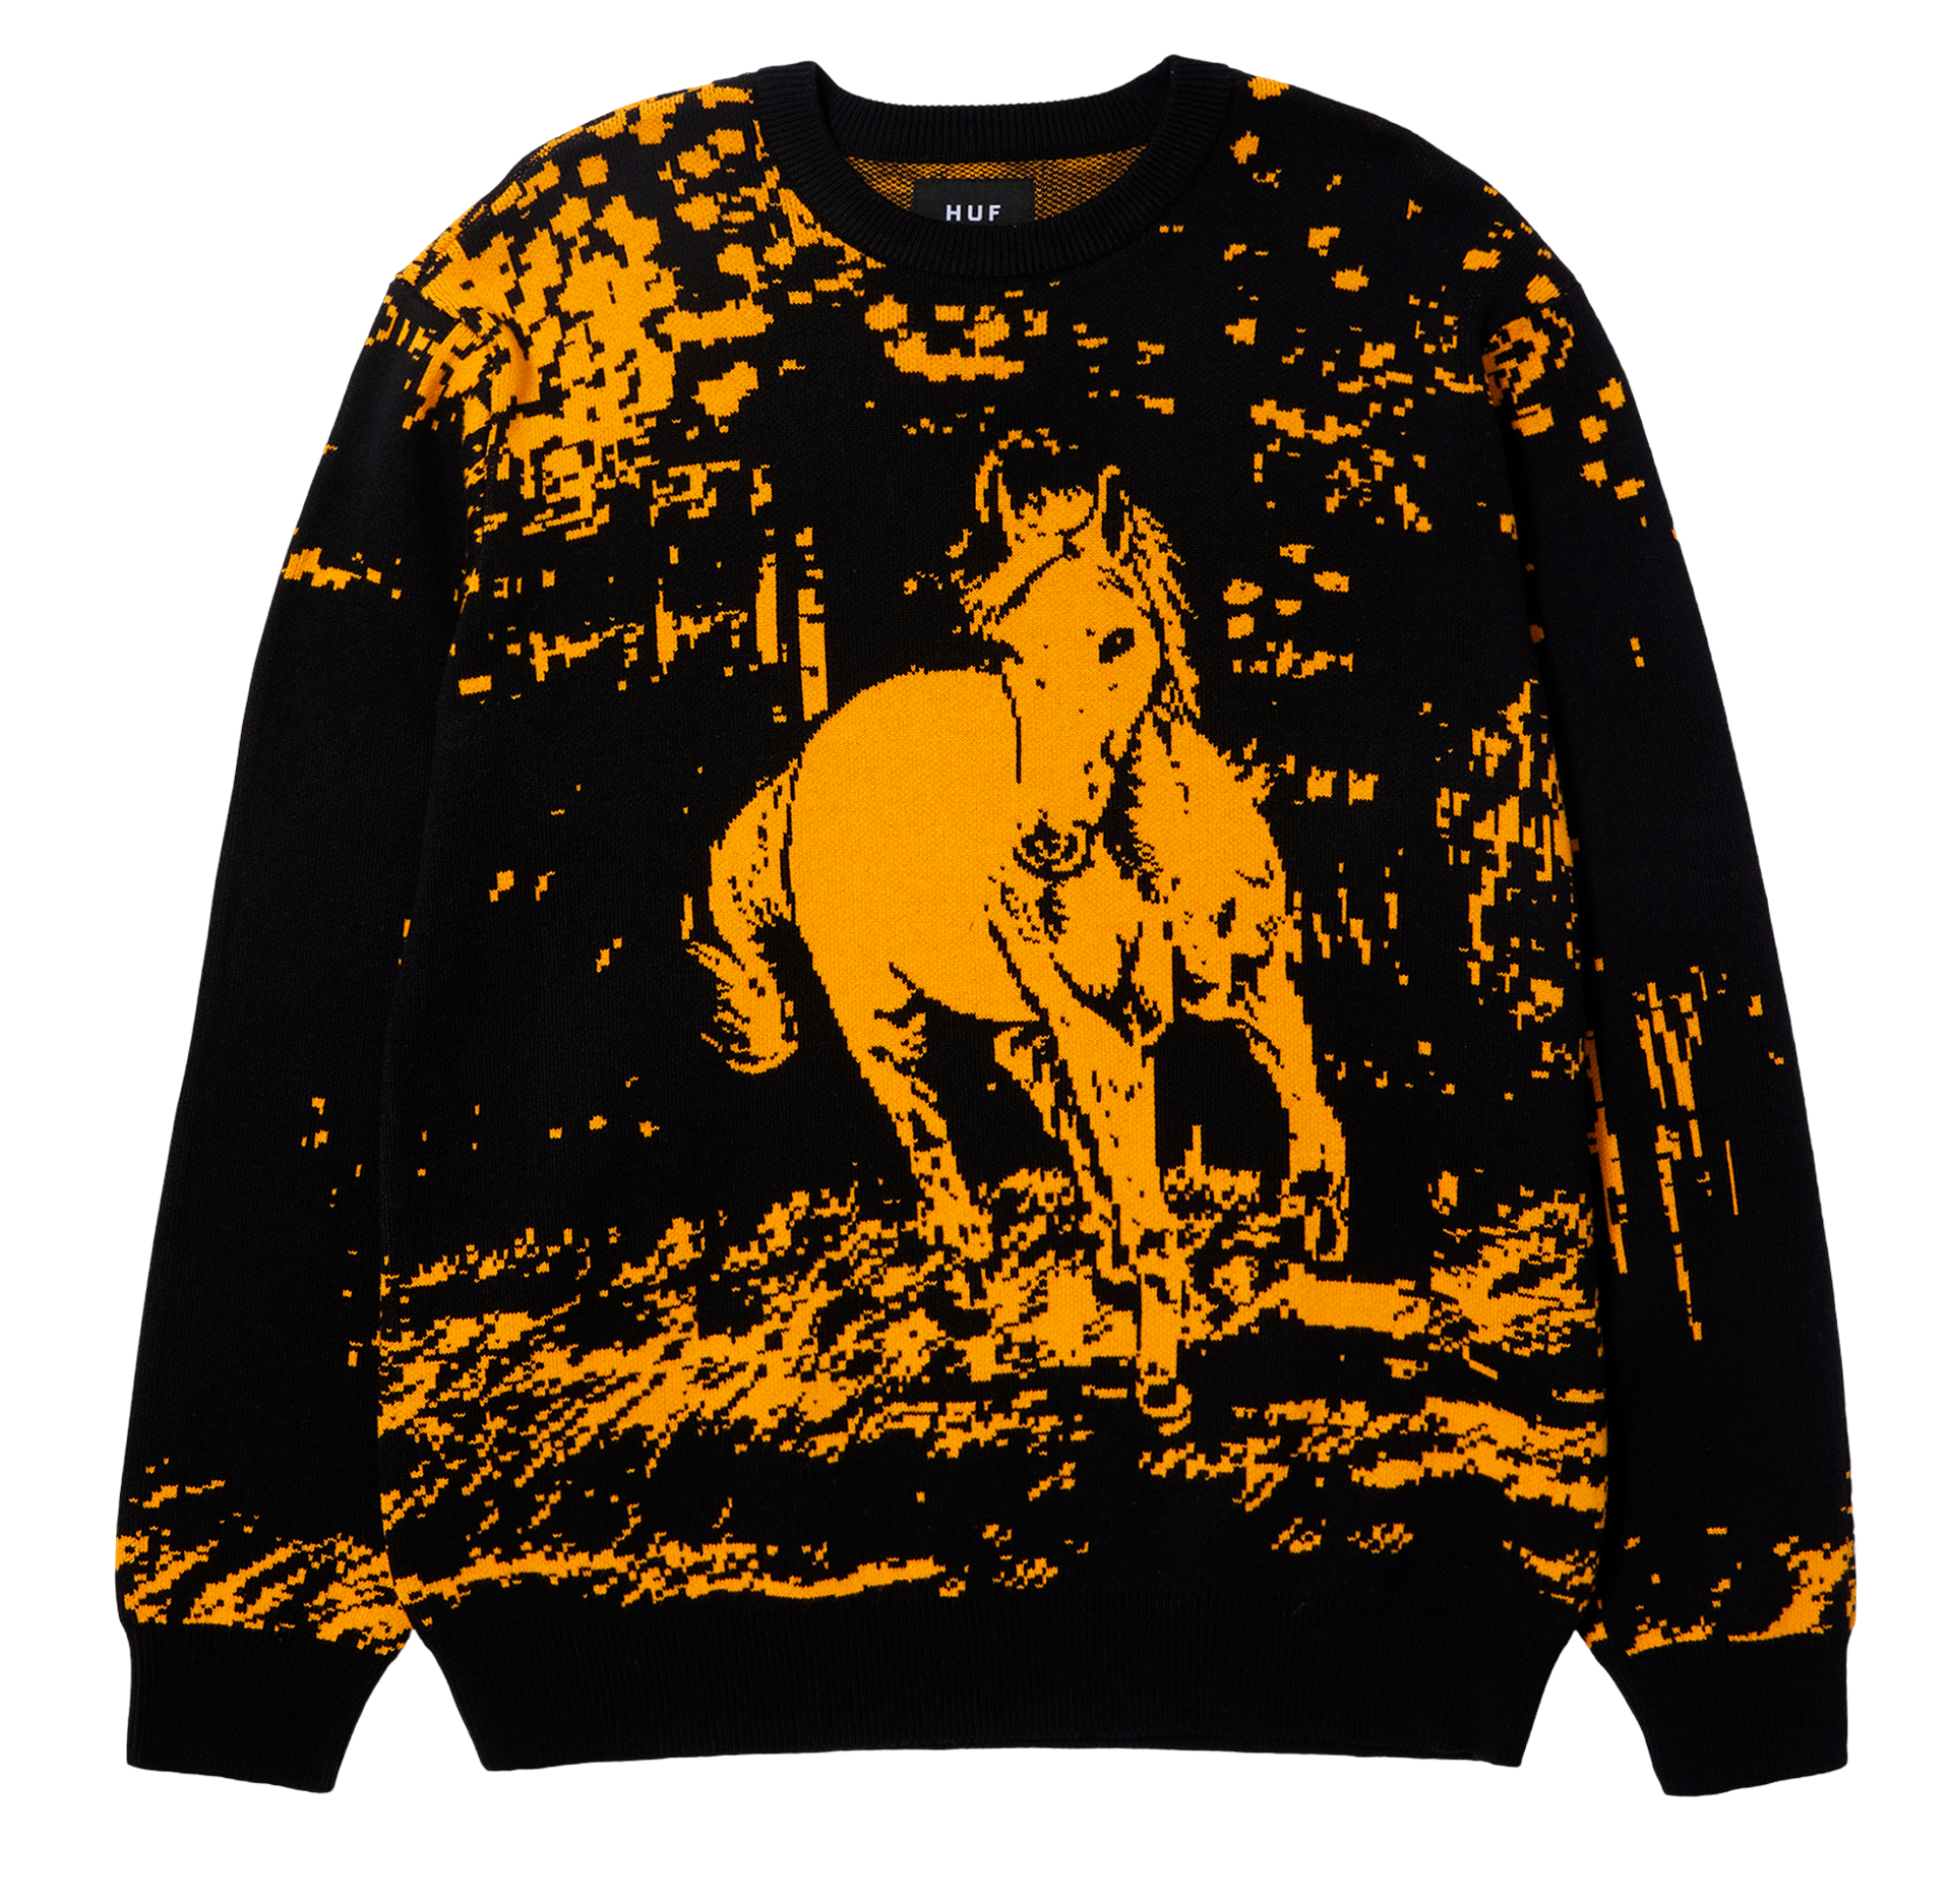 A sweater featuring a horse.